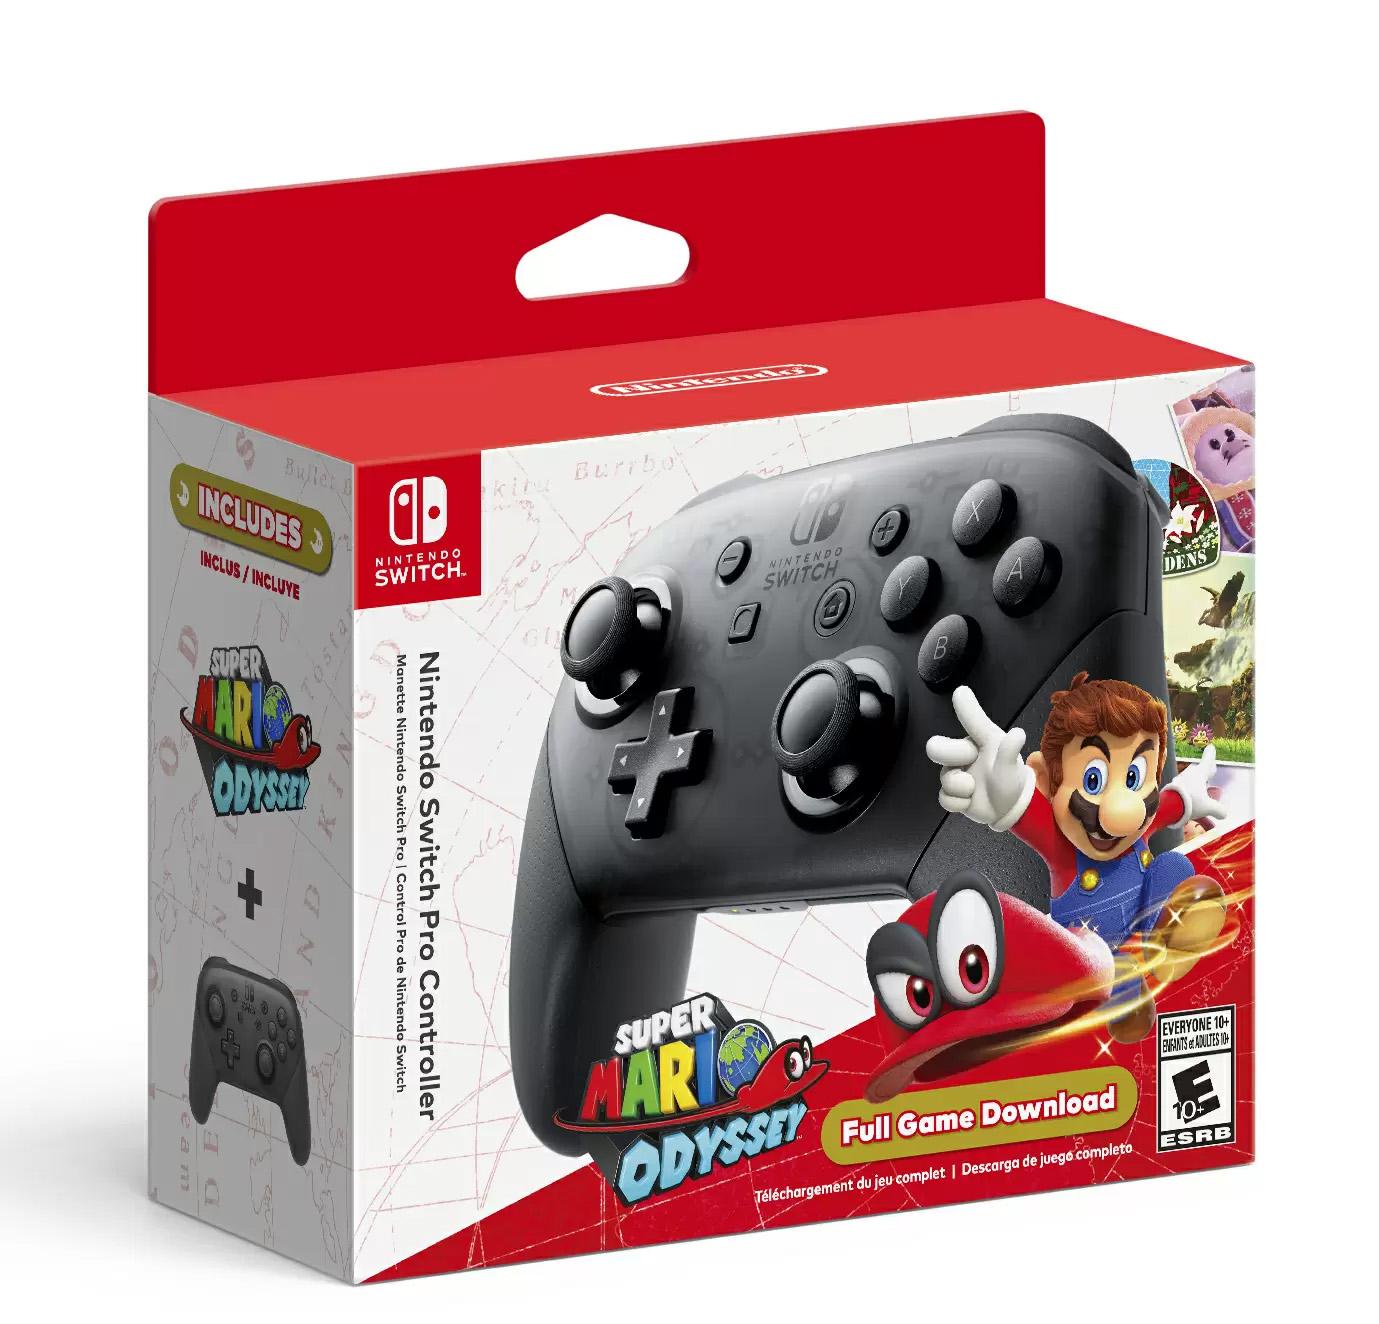 Nintendo Switch Pro Controller with Super Mario Odyssey for $69.99 Shipped